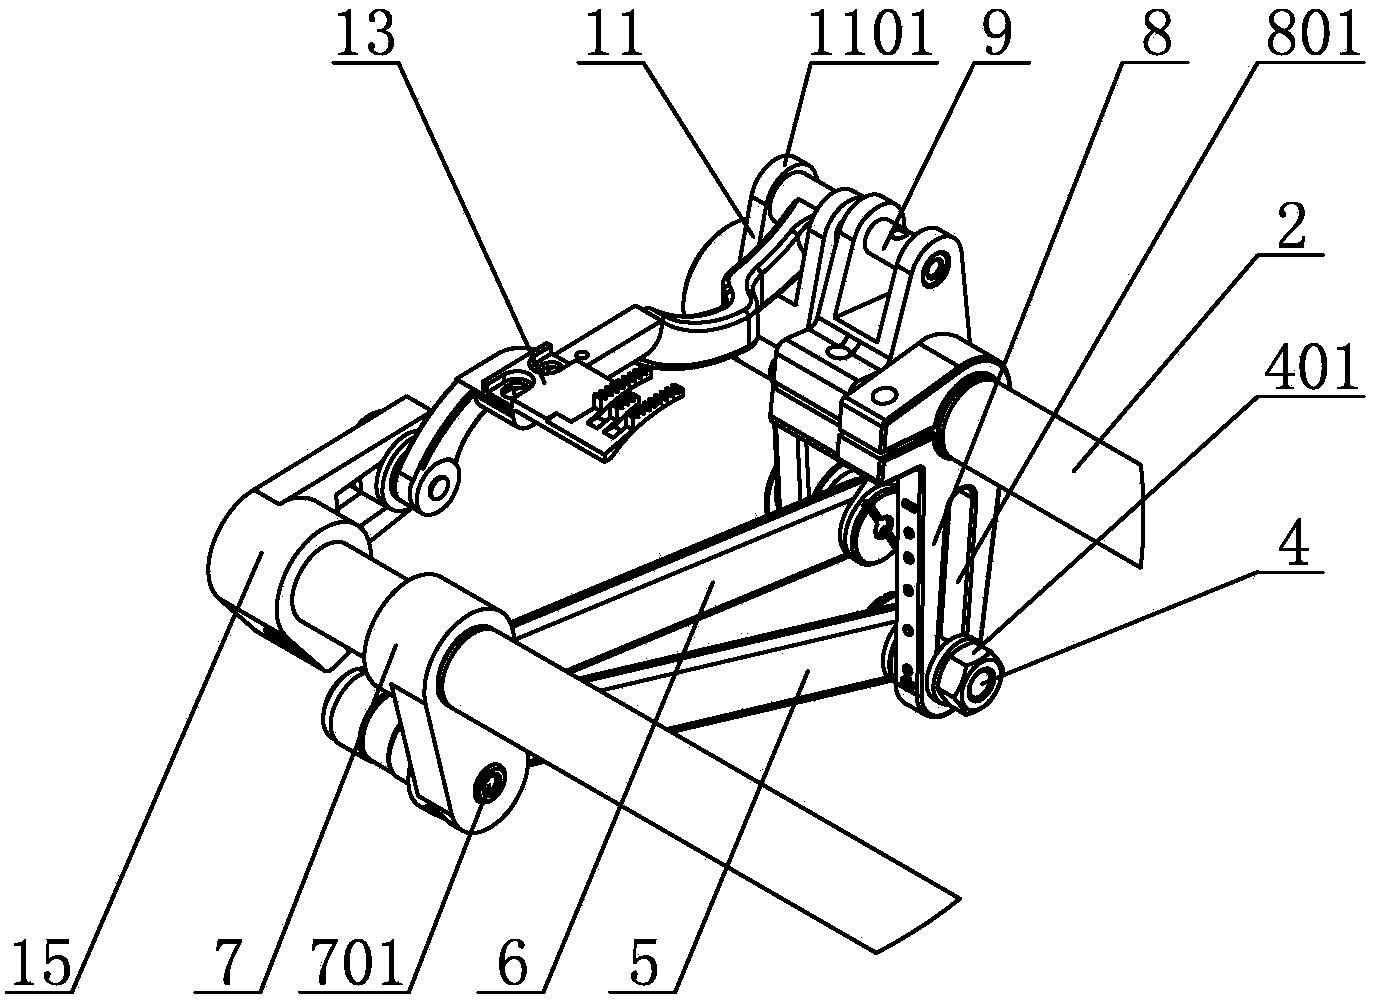 Sewing machine for up-down differential feeding